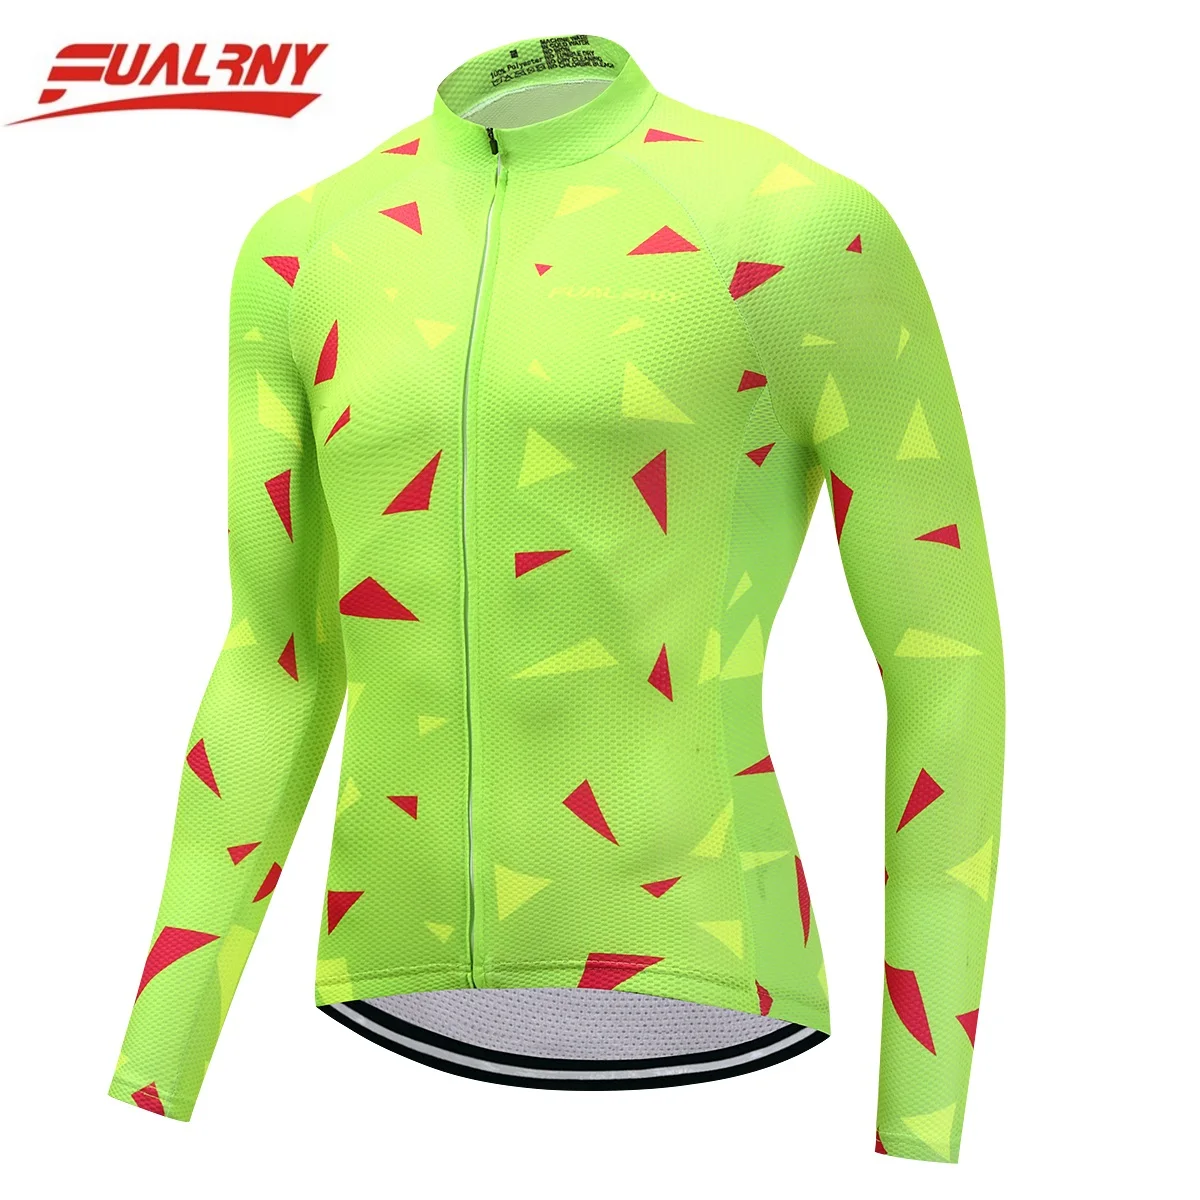 

2018 Team FUALRNY Long sleeve Ropa Ciclismo Cycling Jersey 100% Polyester/Autumn Clothing/MTB Bike Clothes For Man Fluorescence